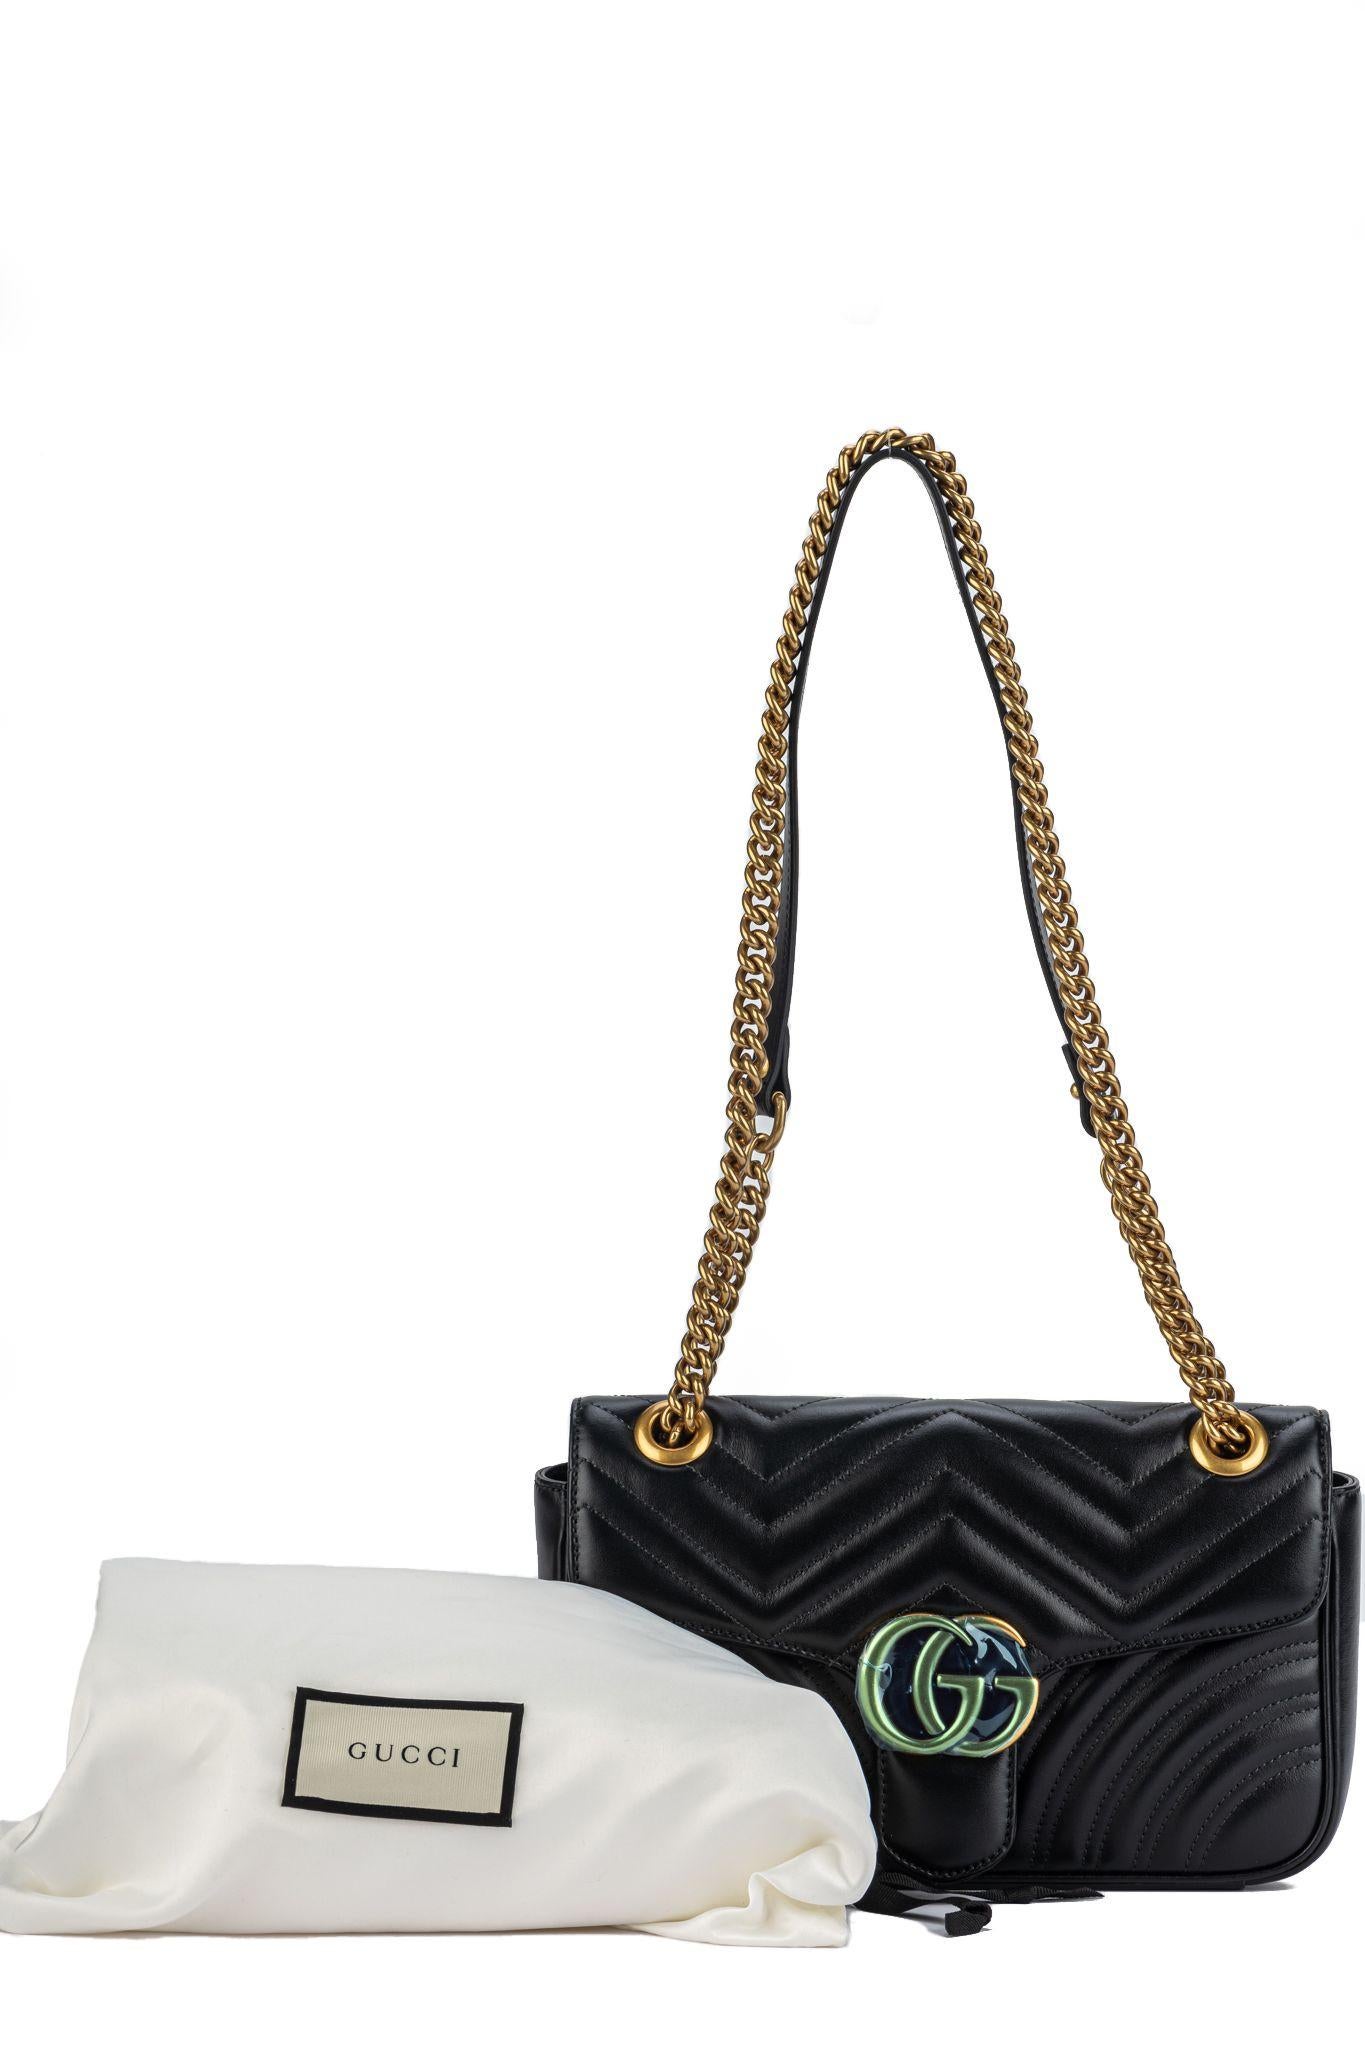 Gucci New Black Marmont Small Bag For Sale 13